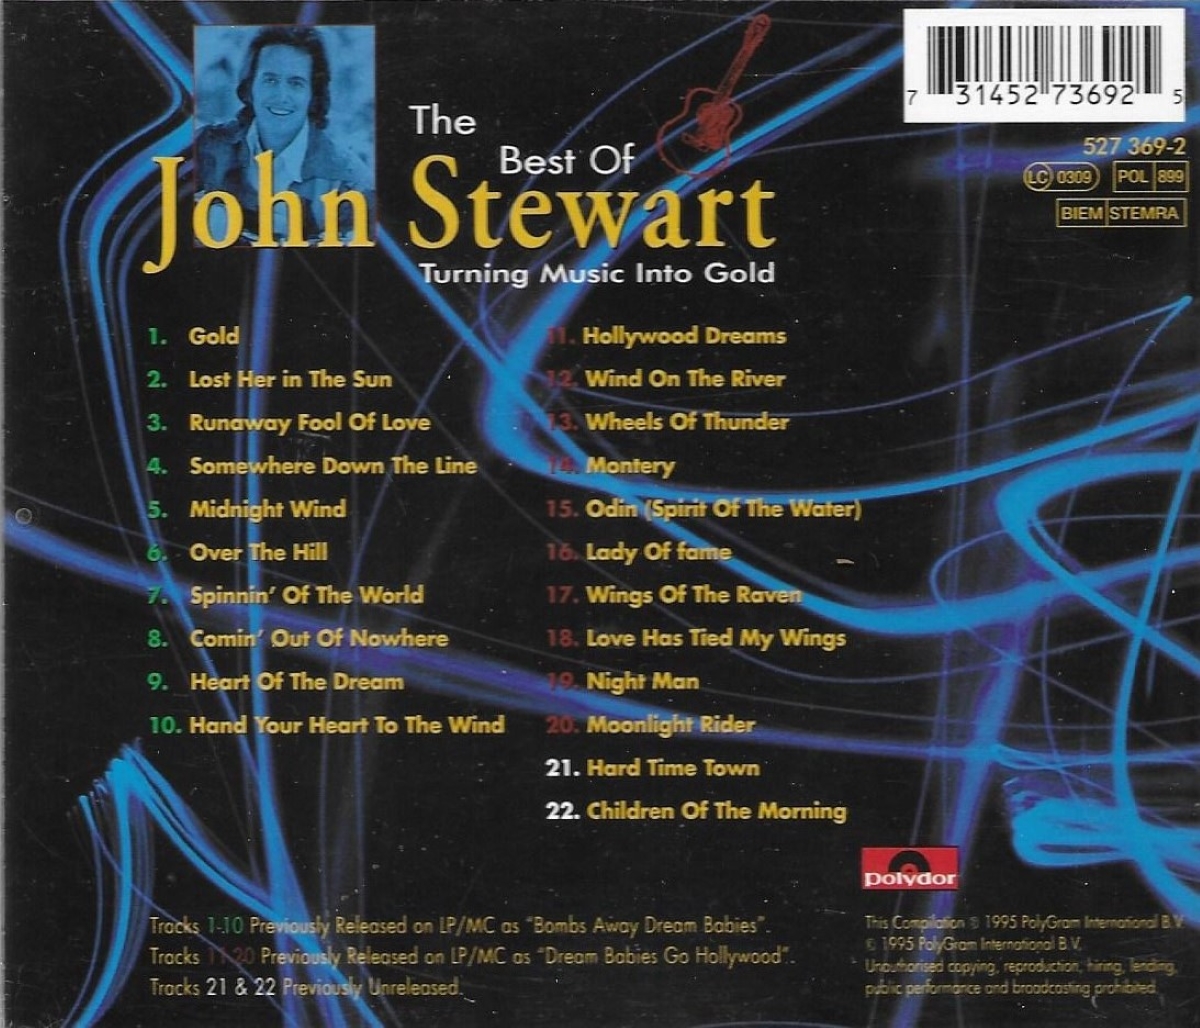 The Best of John Stewart-Turning Music into Gold